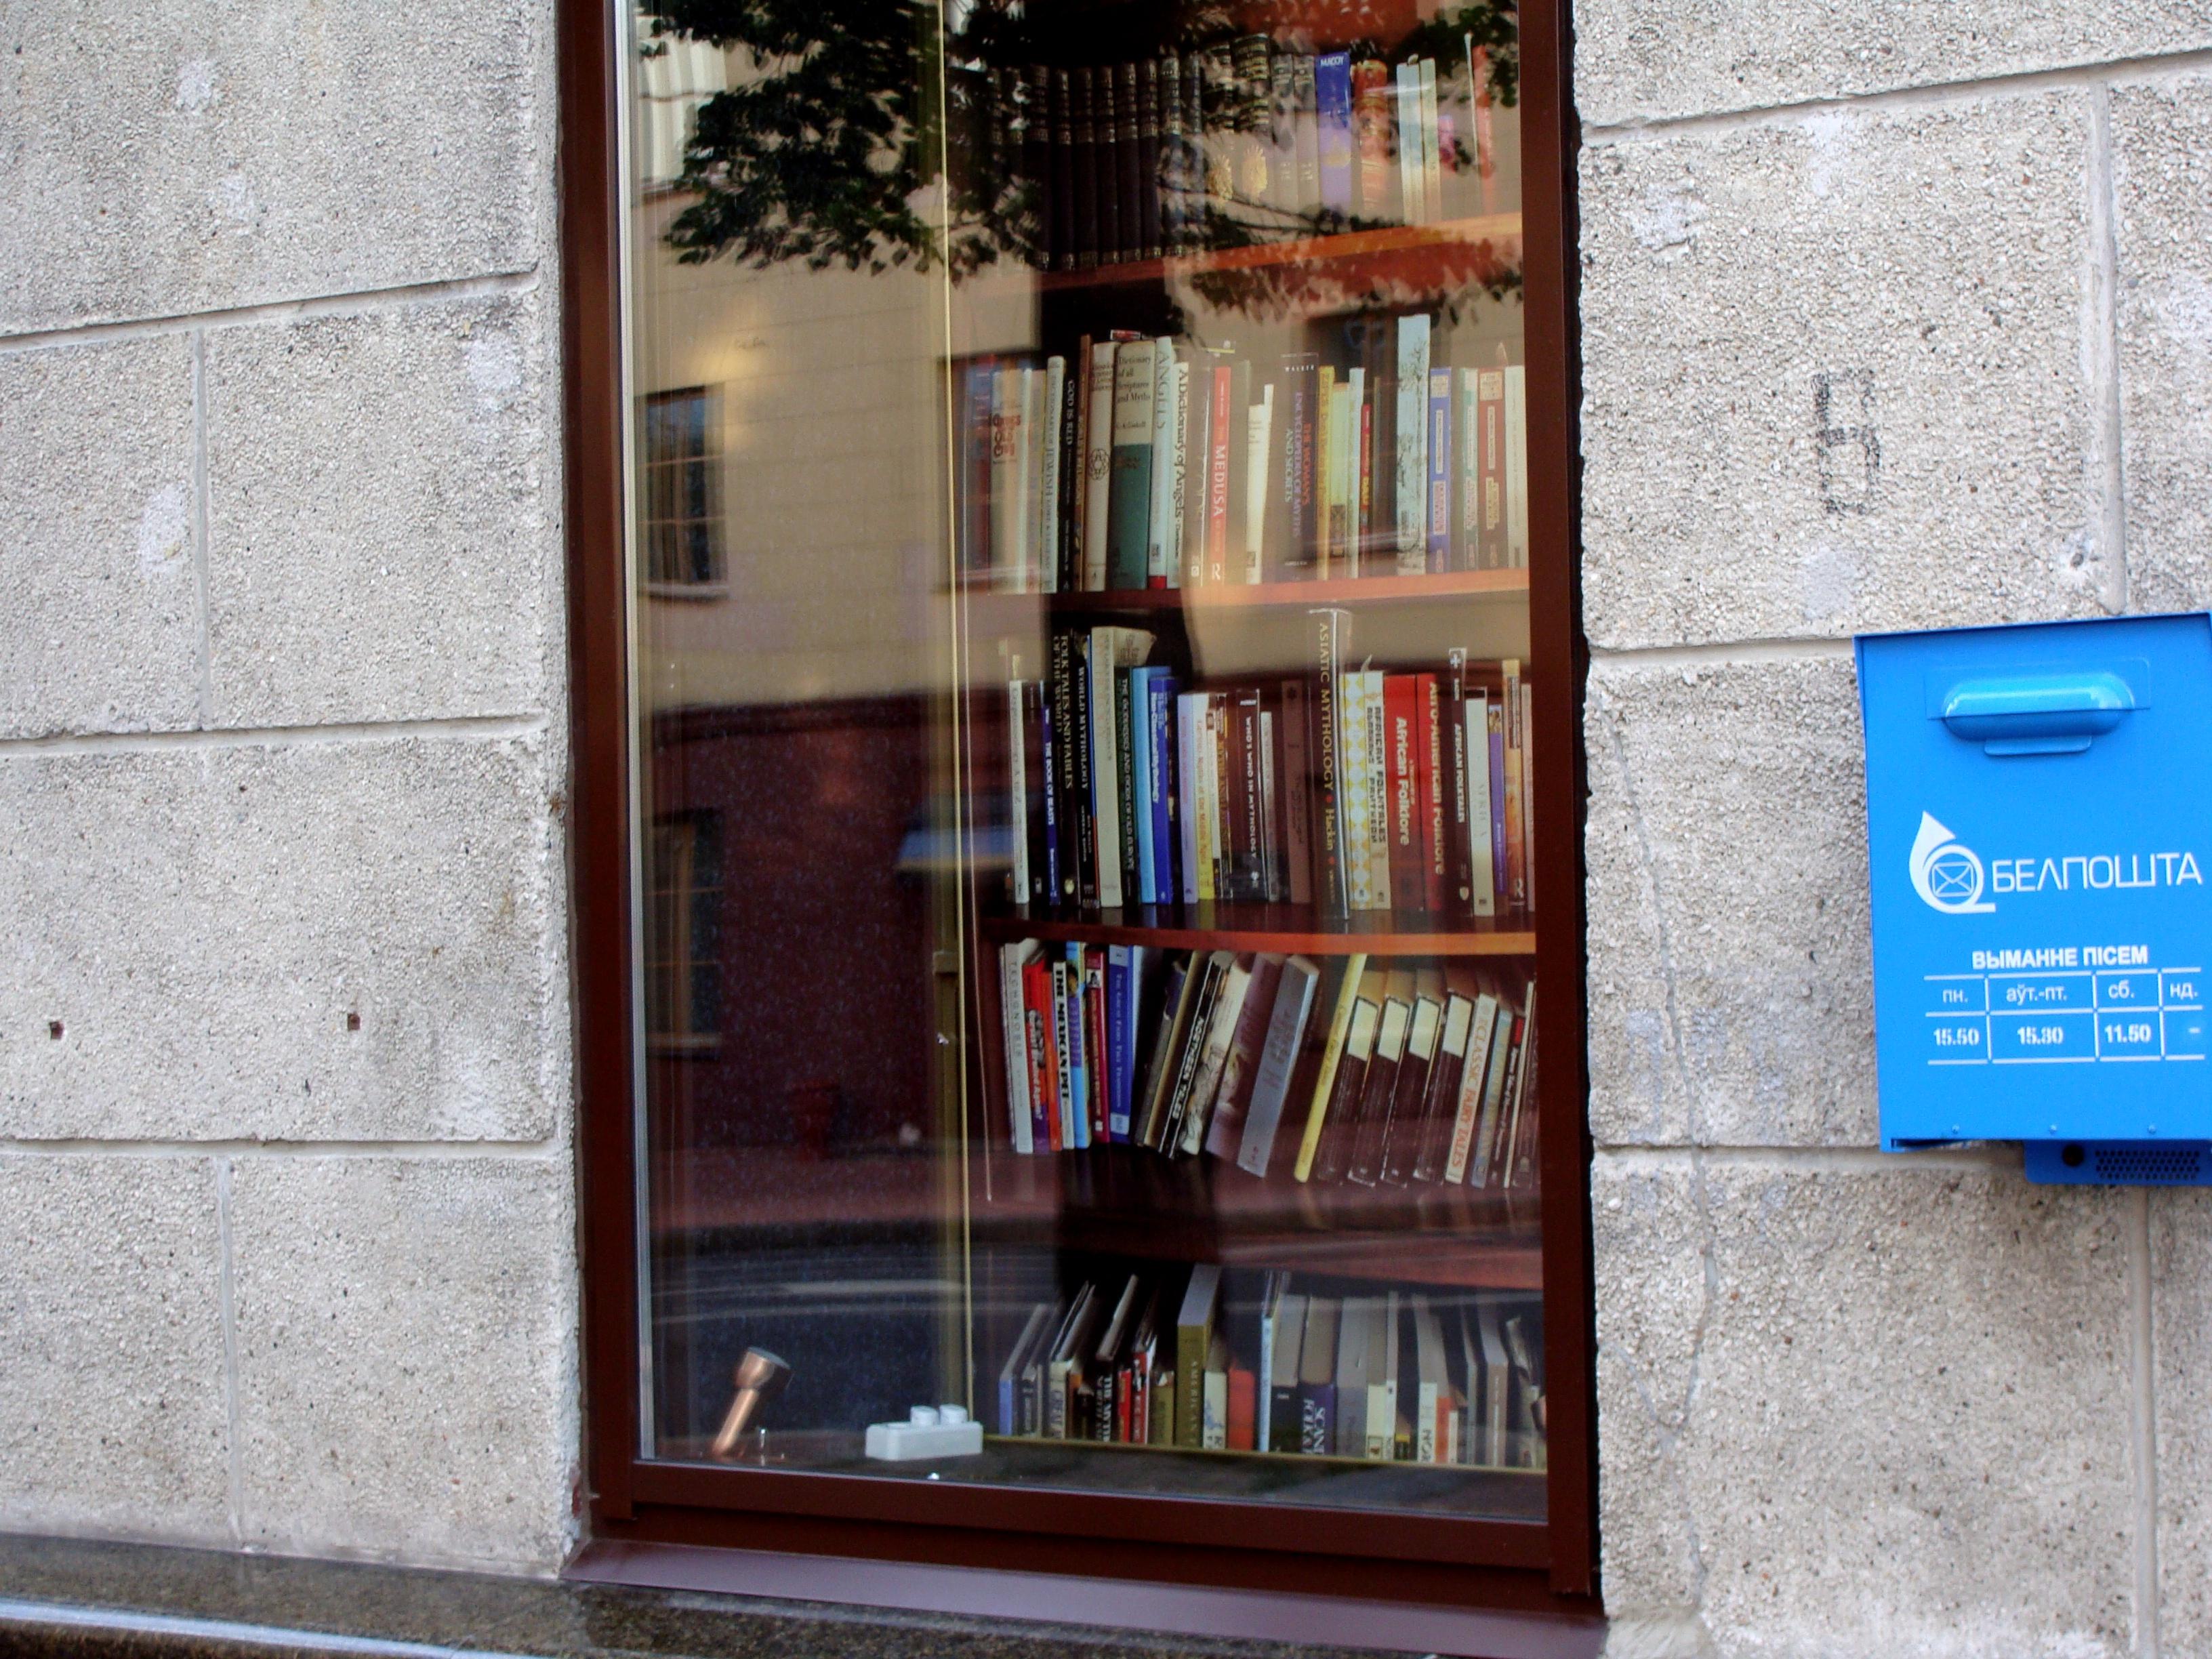 Cover image of this place Central Bookshop (Кнiгарня)